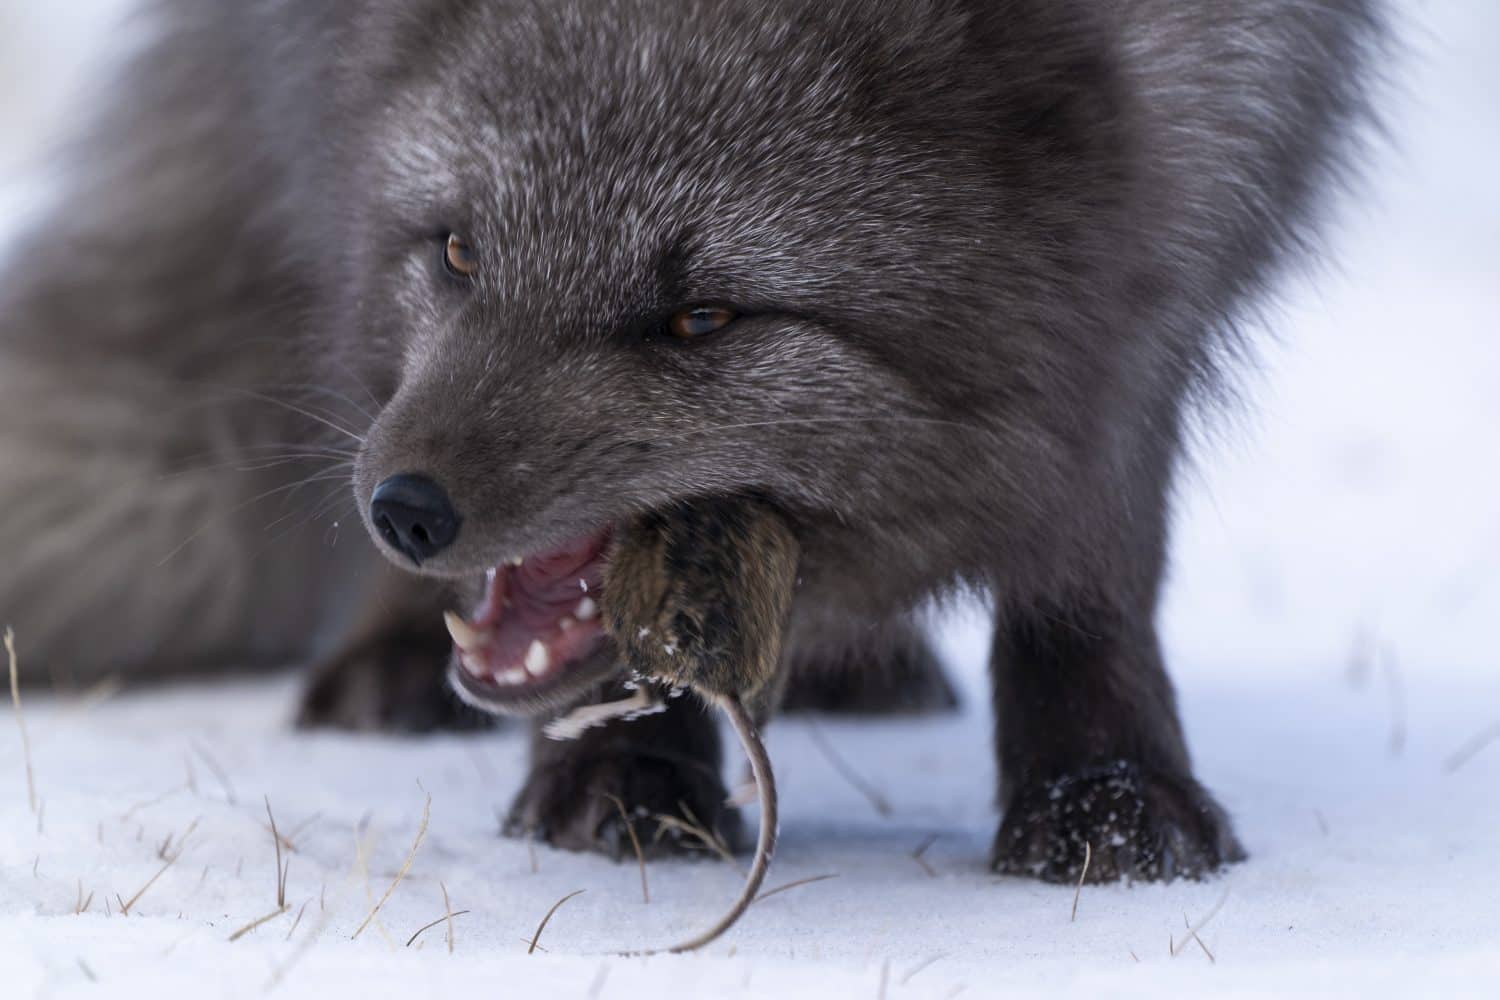 Arctic fox eating a mouse in snow